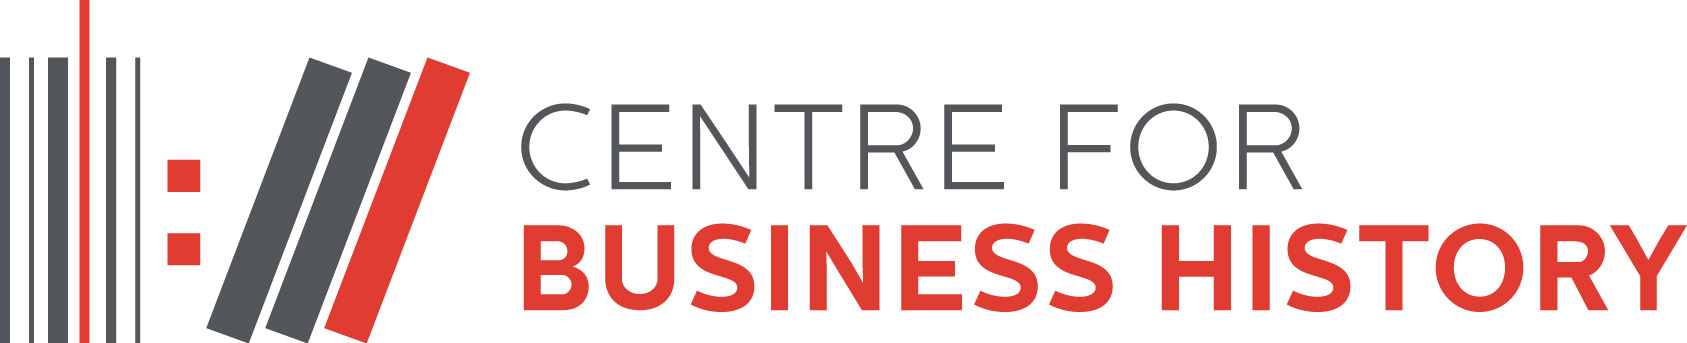 Centre For Business History Logo